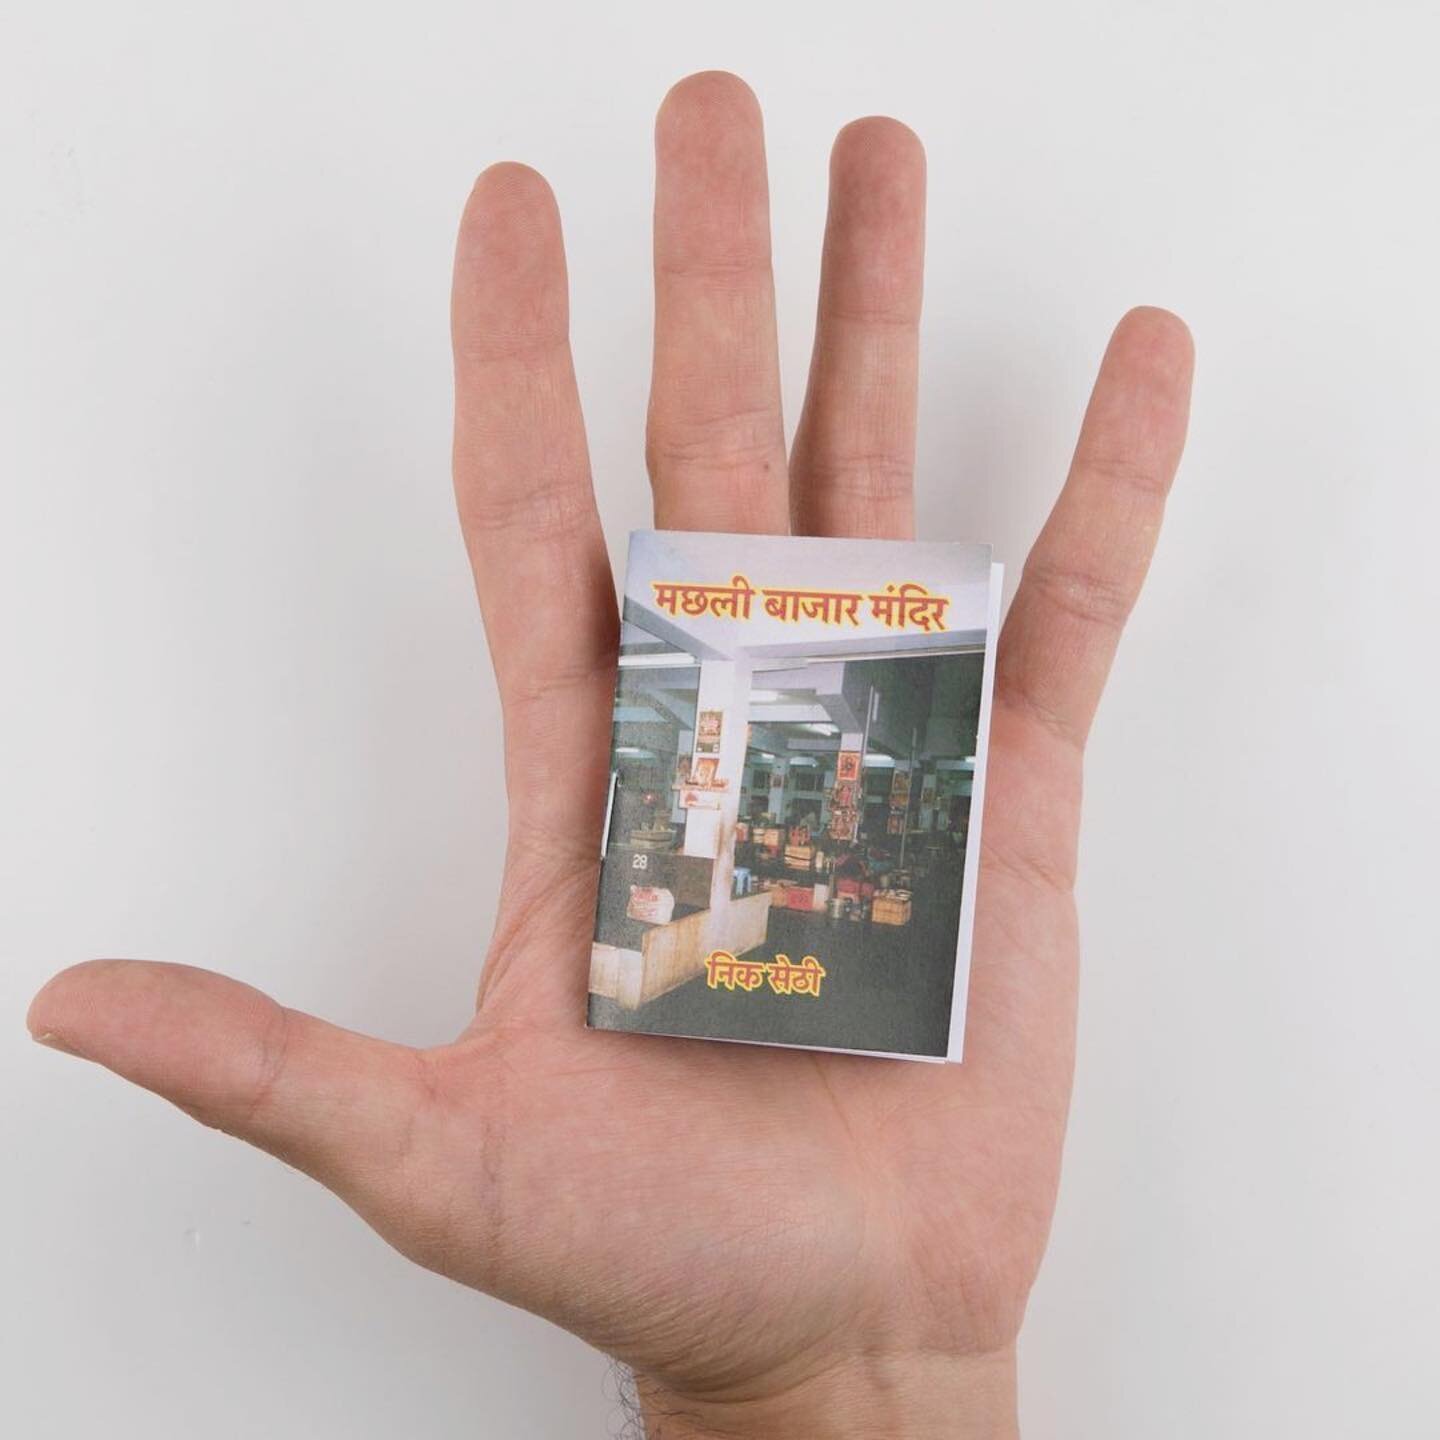 How sweet is this palm-sized mini zine by @sicknethi!? Featuring photographs of mandirs or shrines at a fish market, it was printed in New Delhi alongside Nick&rsquo;s first monograph, Khichdi (Kitchari), with @brianpaullamotte for @dashwood_books. 
